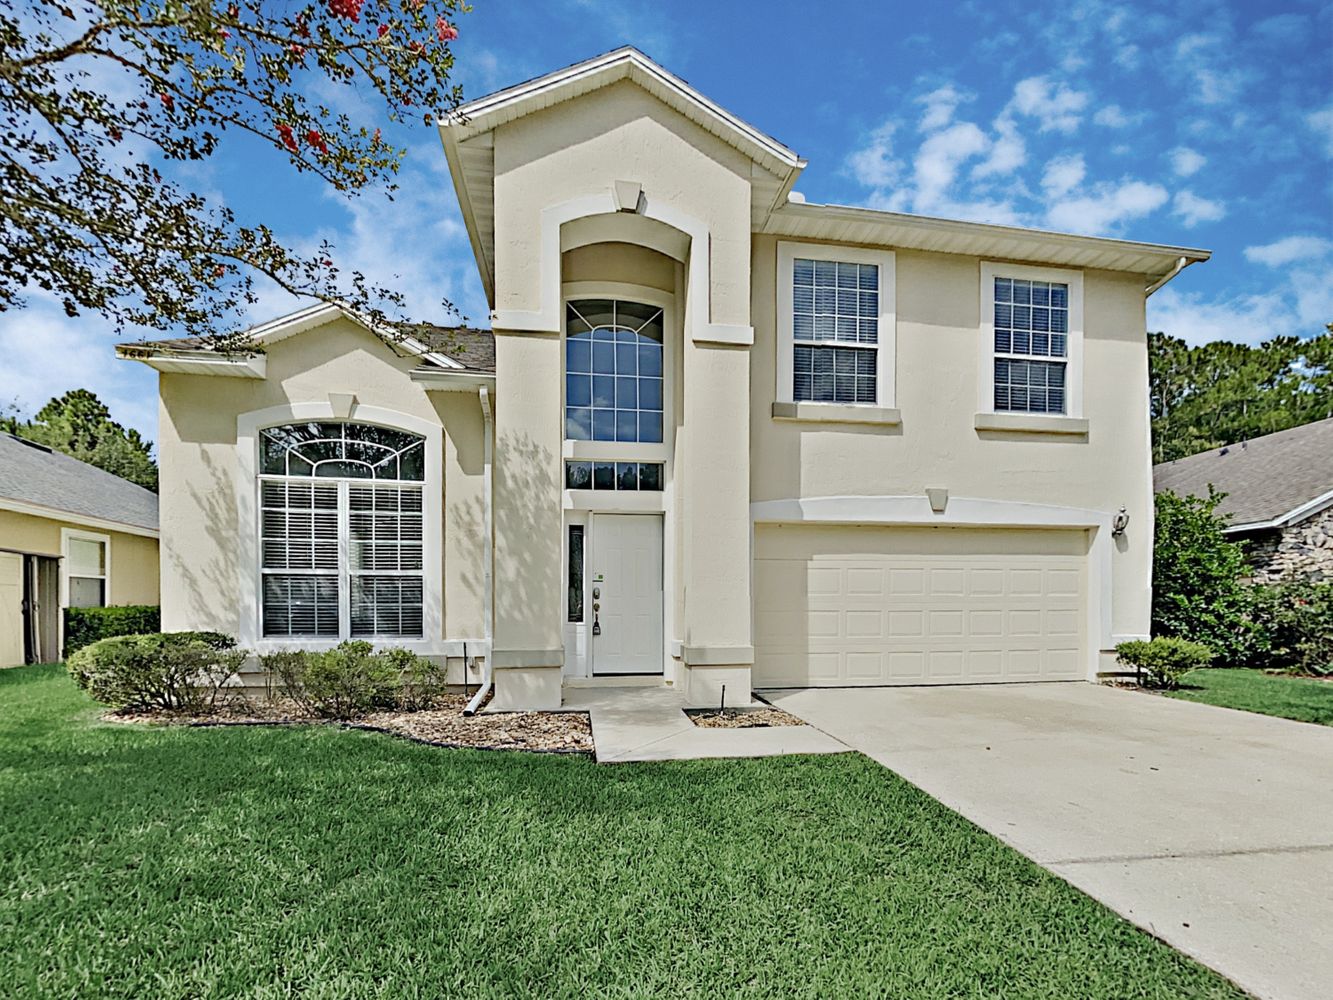 Gorgeous home with a two-car garage at Invitation Homes Jacksonville.